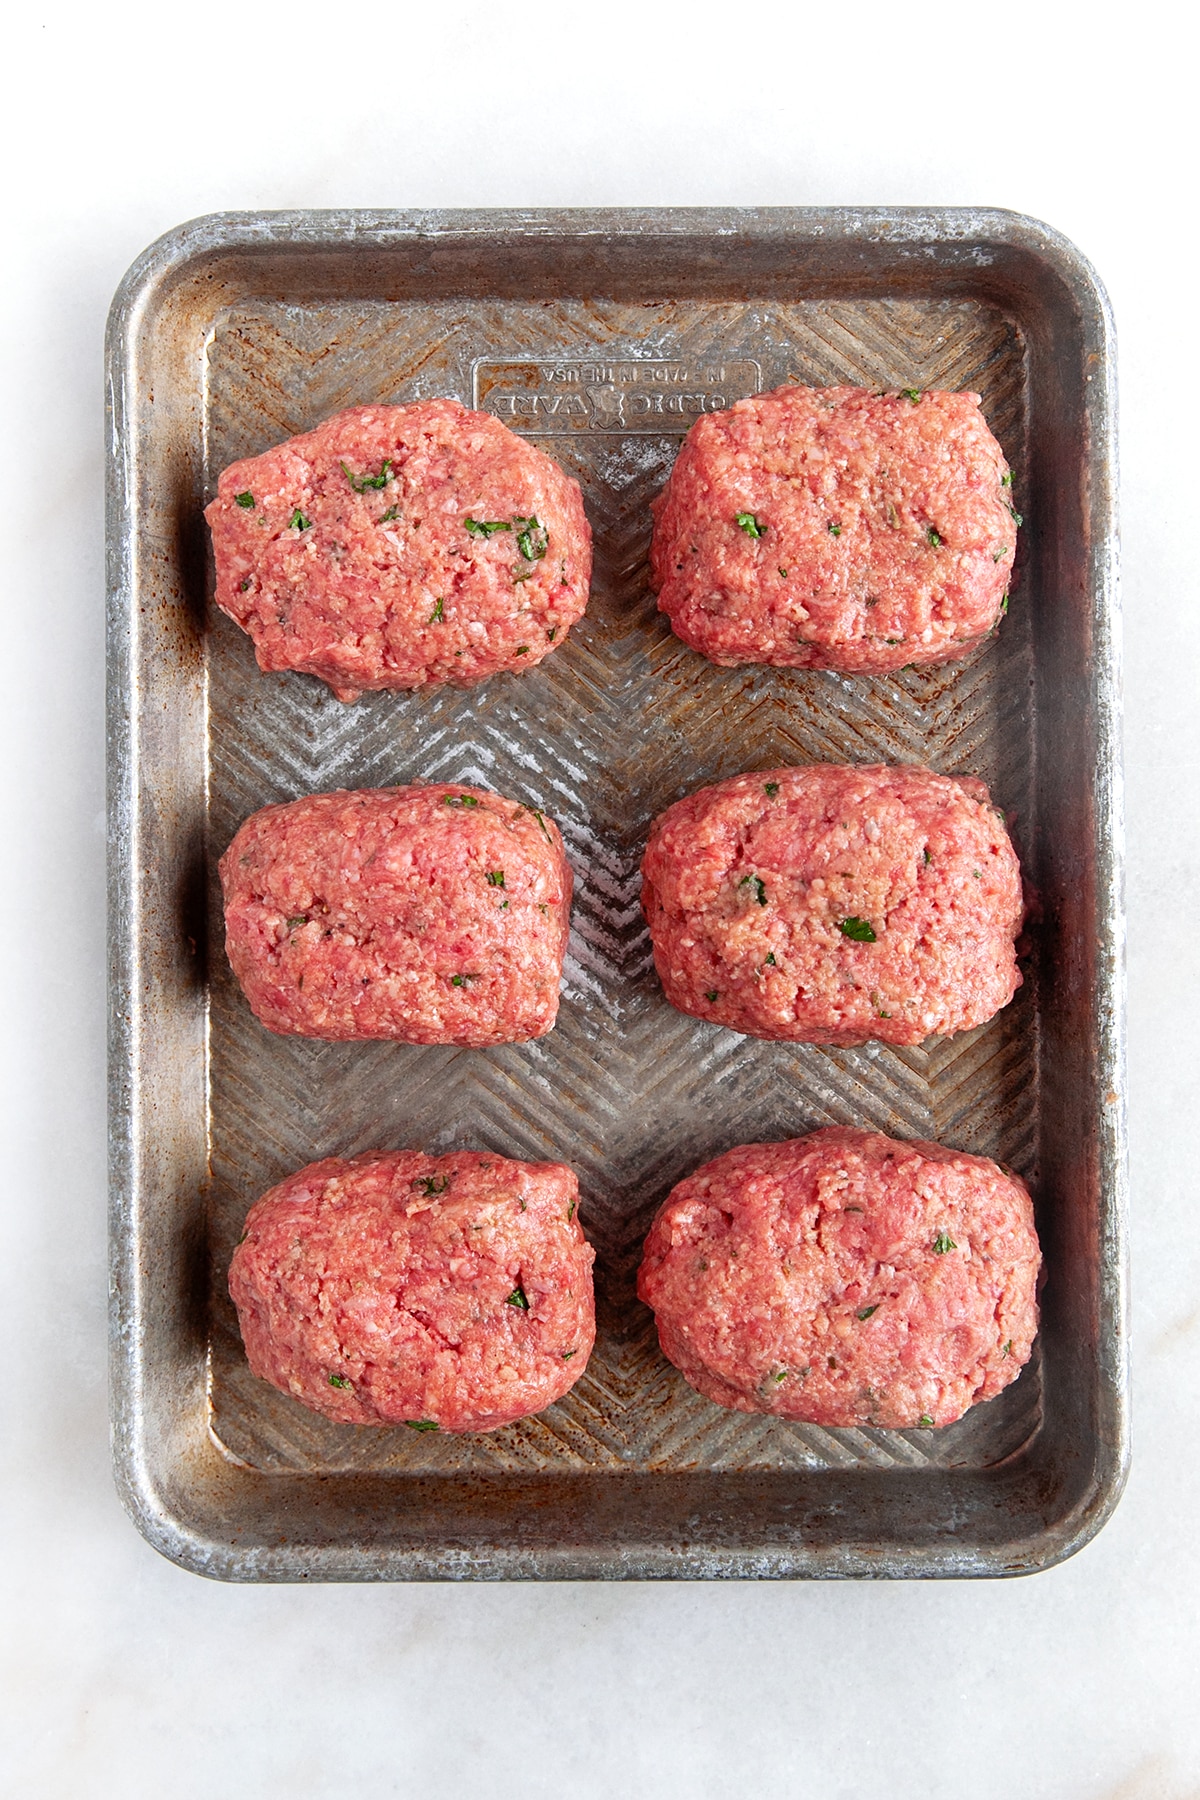 Mini meatloaf without the sauce. 